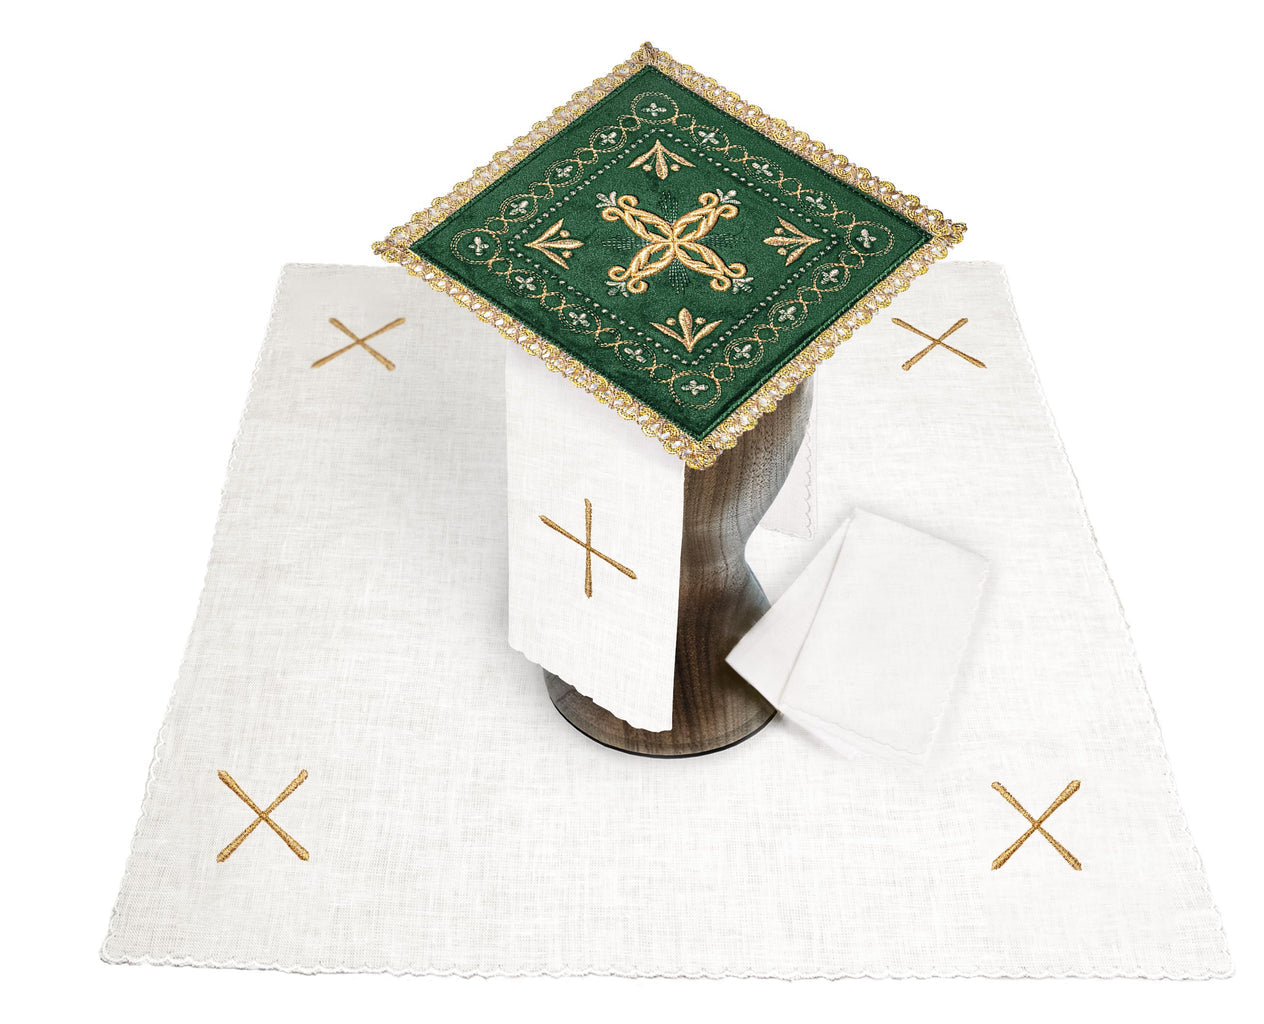 Chalice linen made of velvet with gold embroidery